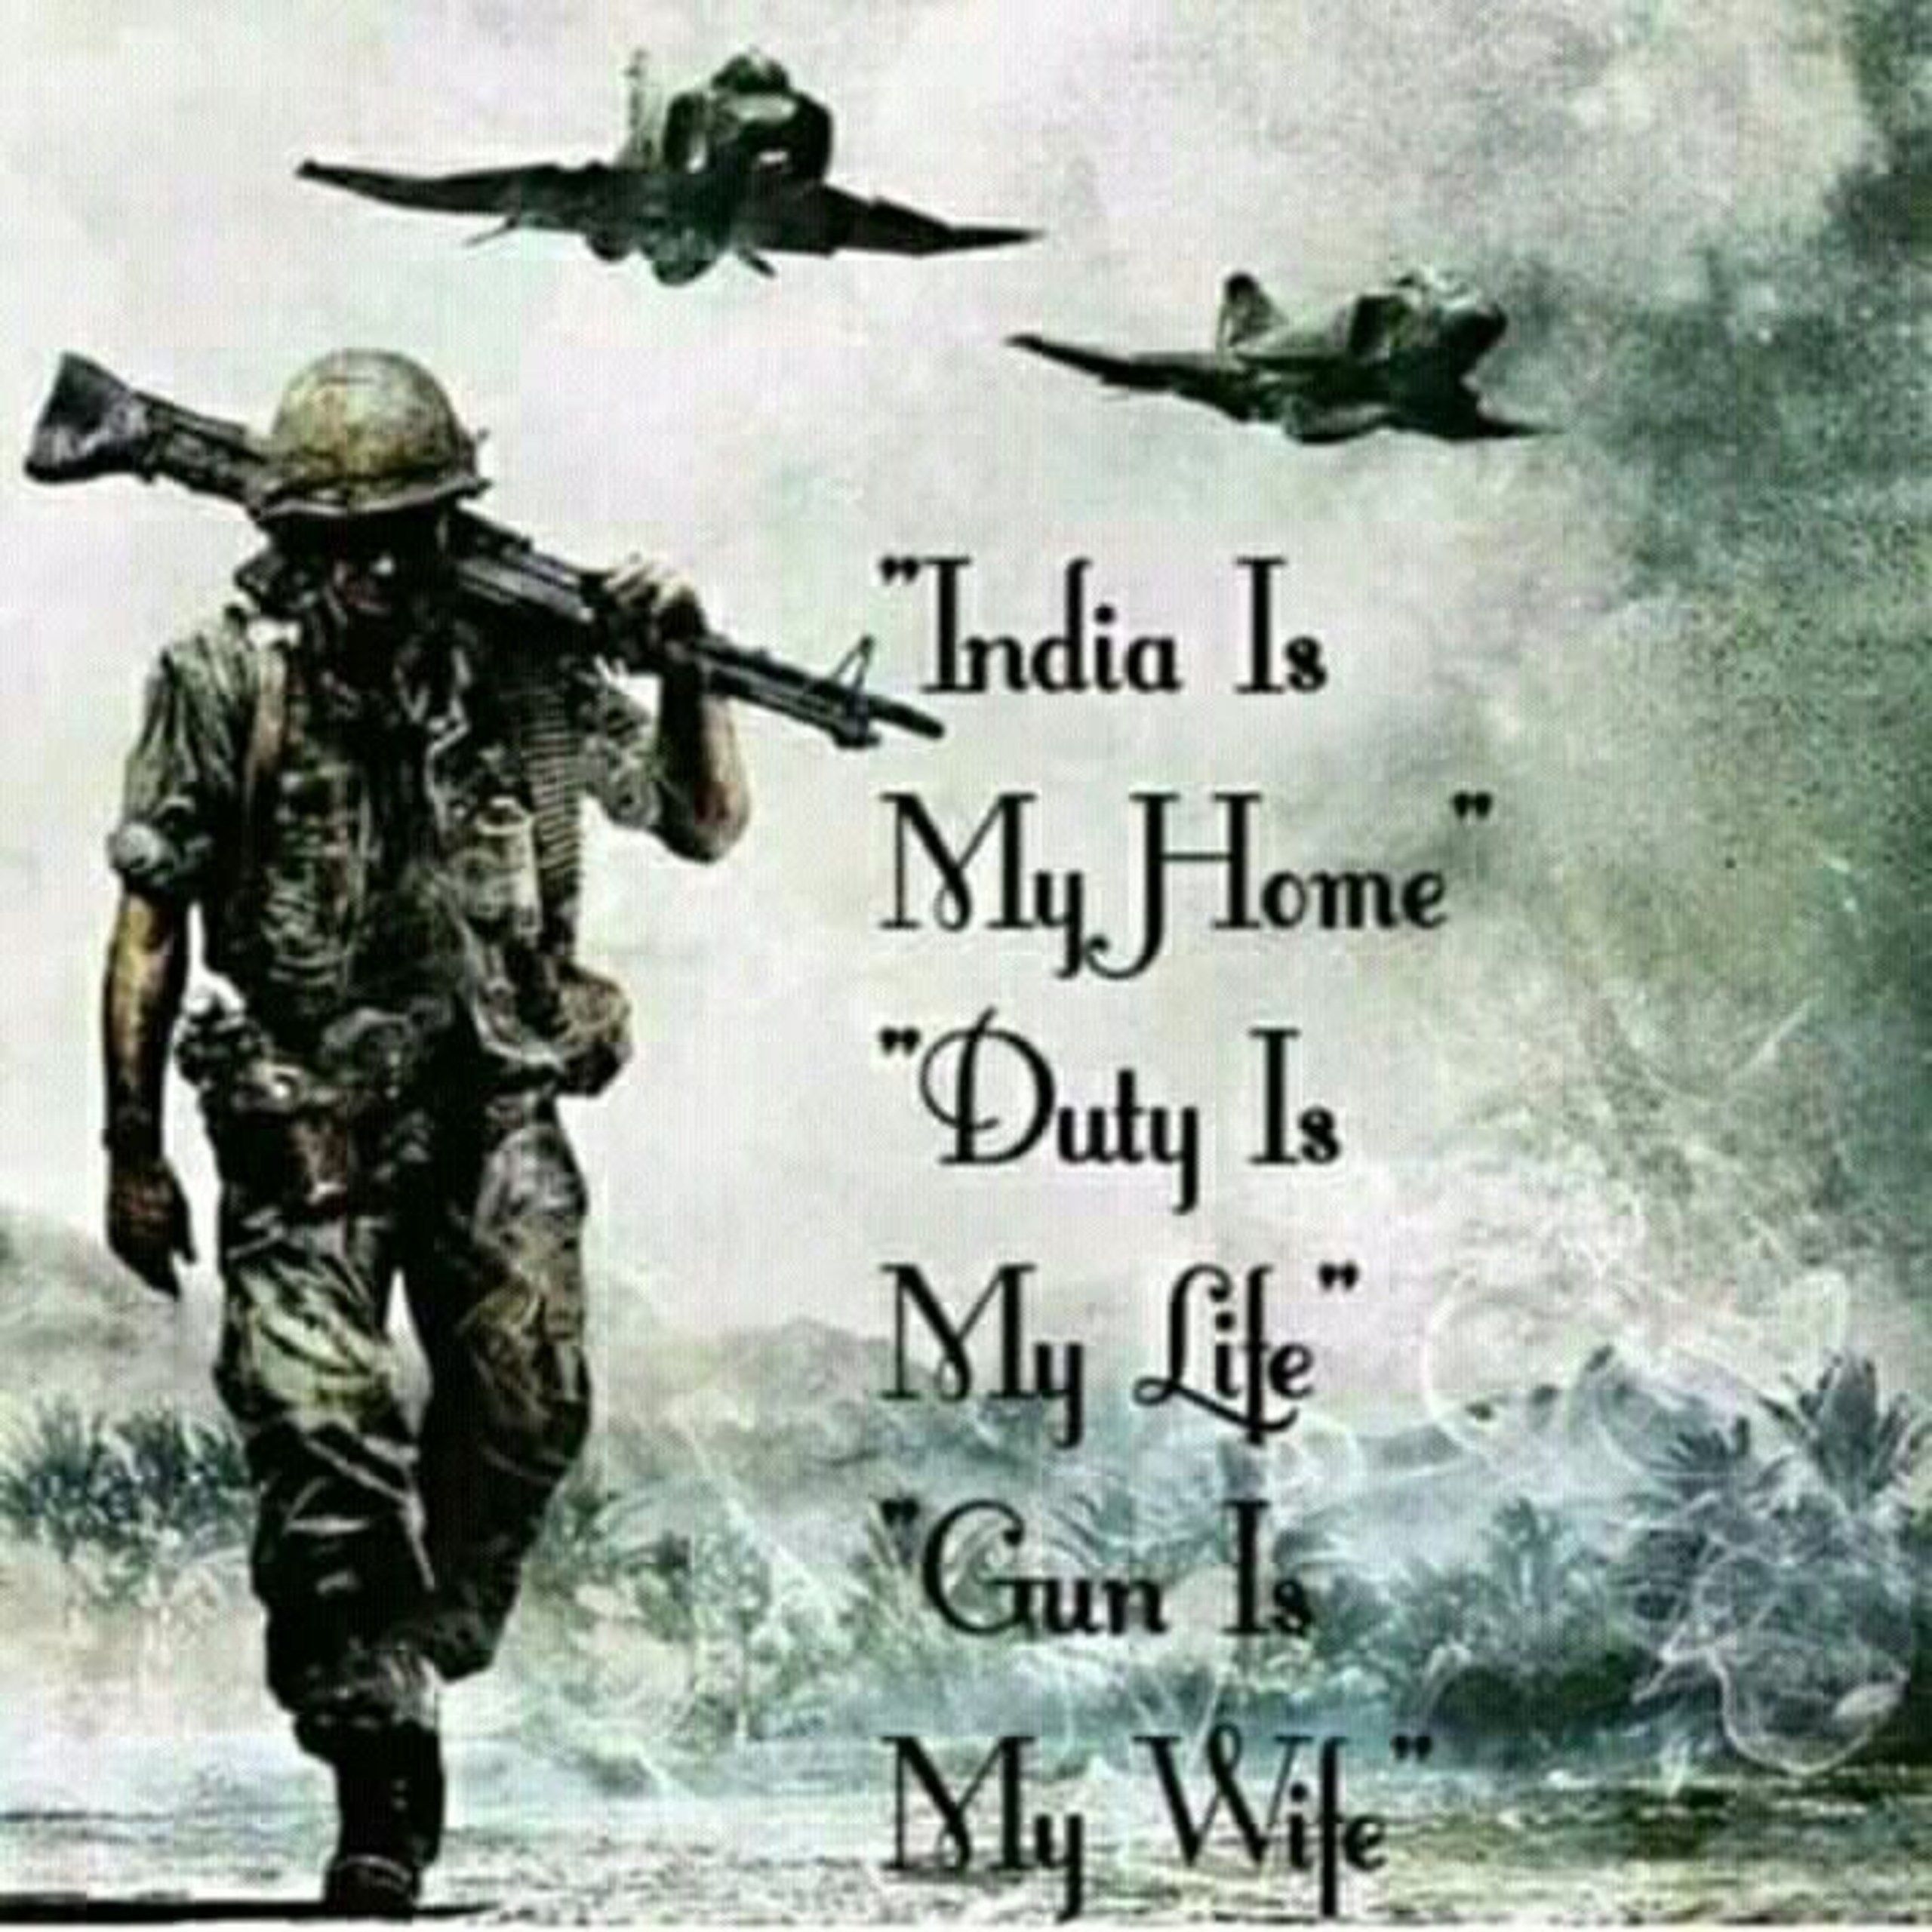 Indian Army Wallpaper Download. HD Wallpaper For Desktop And Gadget. Indian army wallpaper, Indian army quotes, Army wallpaper